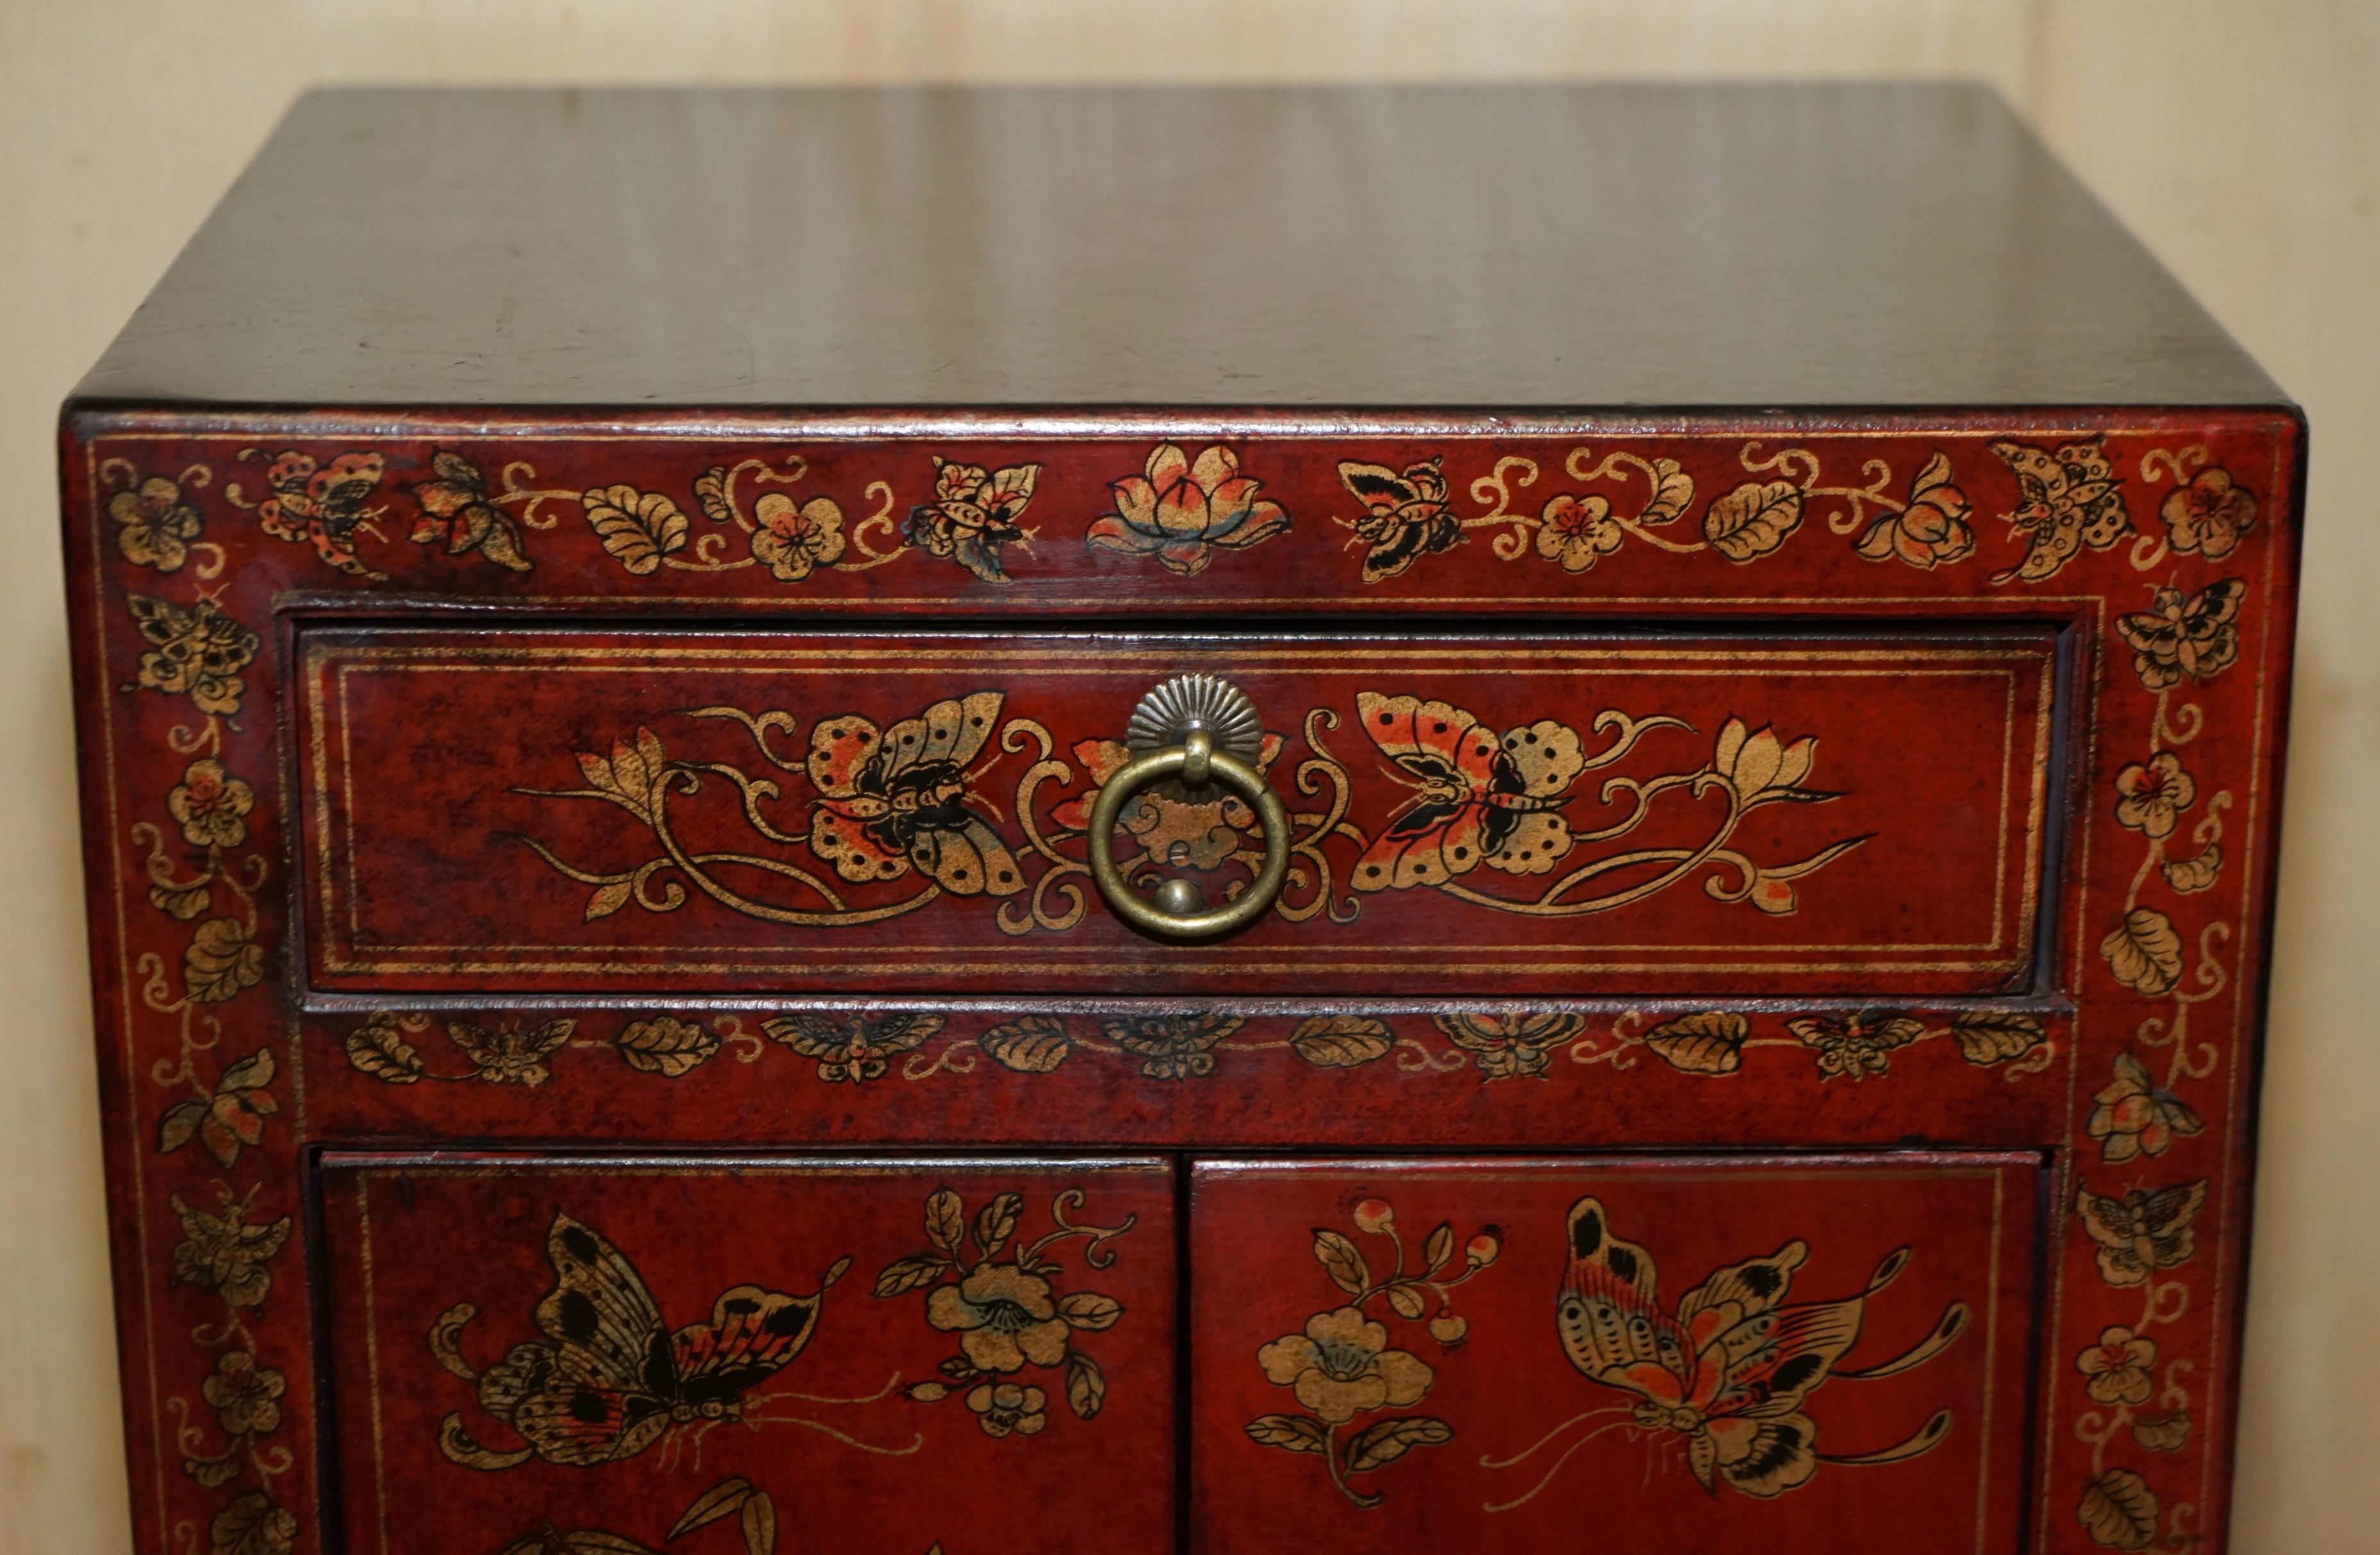 Chinese Export Vintage Chinese Hand Painted Lacquered Side Table Sized Cupboard with Drawer For Sale